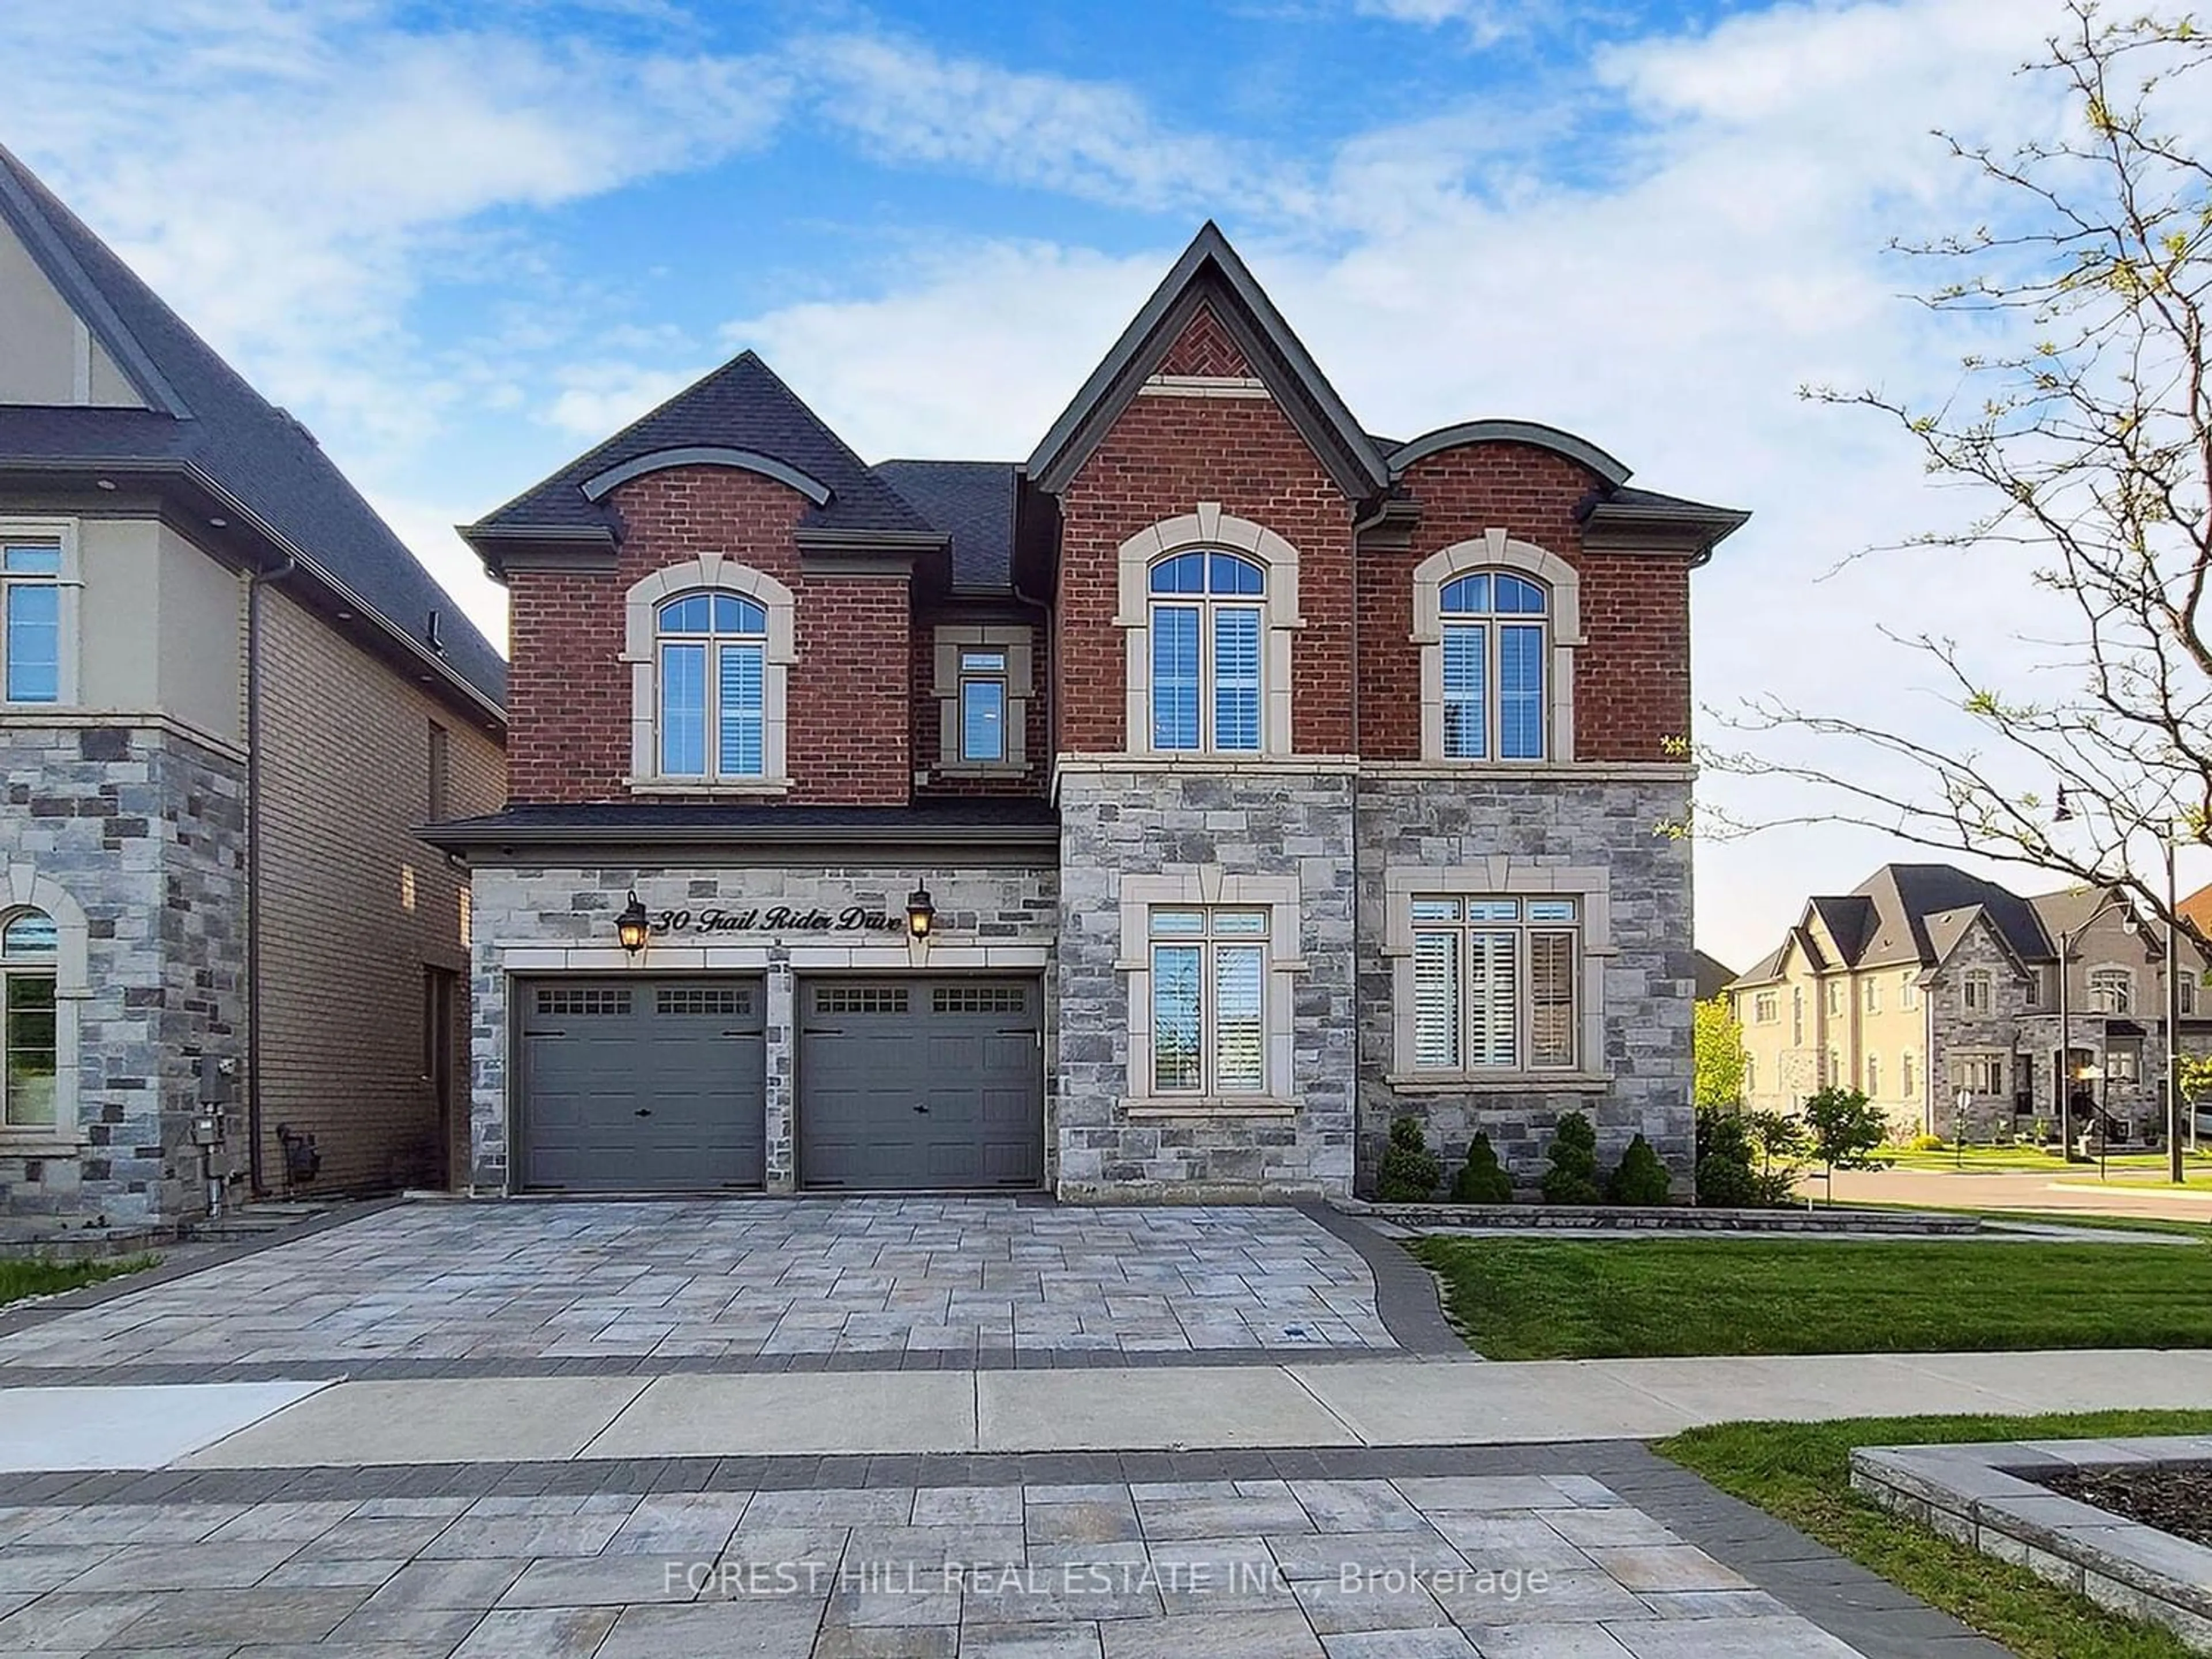 Home with brick exterior material for 30 Trail Rider Dr, Brampton Ontario L6P 4M4